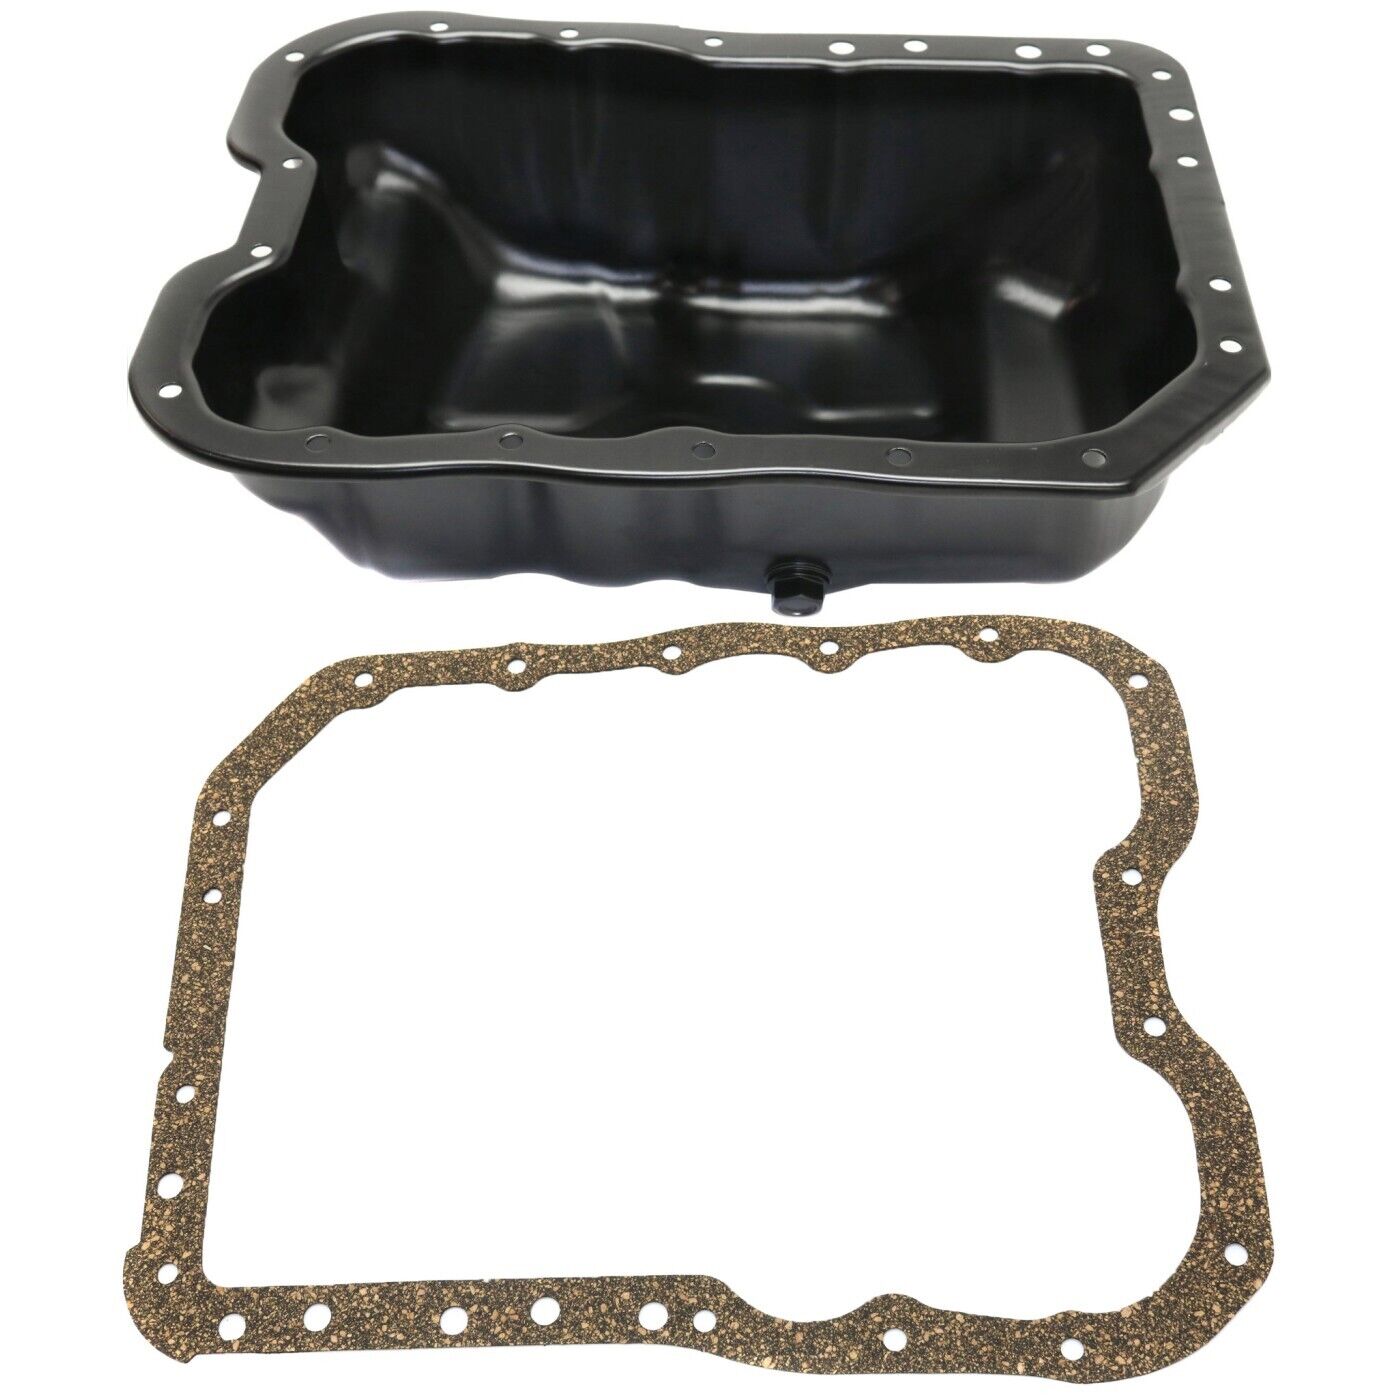 Oil Pan Kit For 09-20 Dodge Journey 07-17 Jeep Patriot Compass DOHC with Gasket